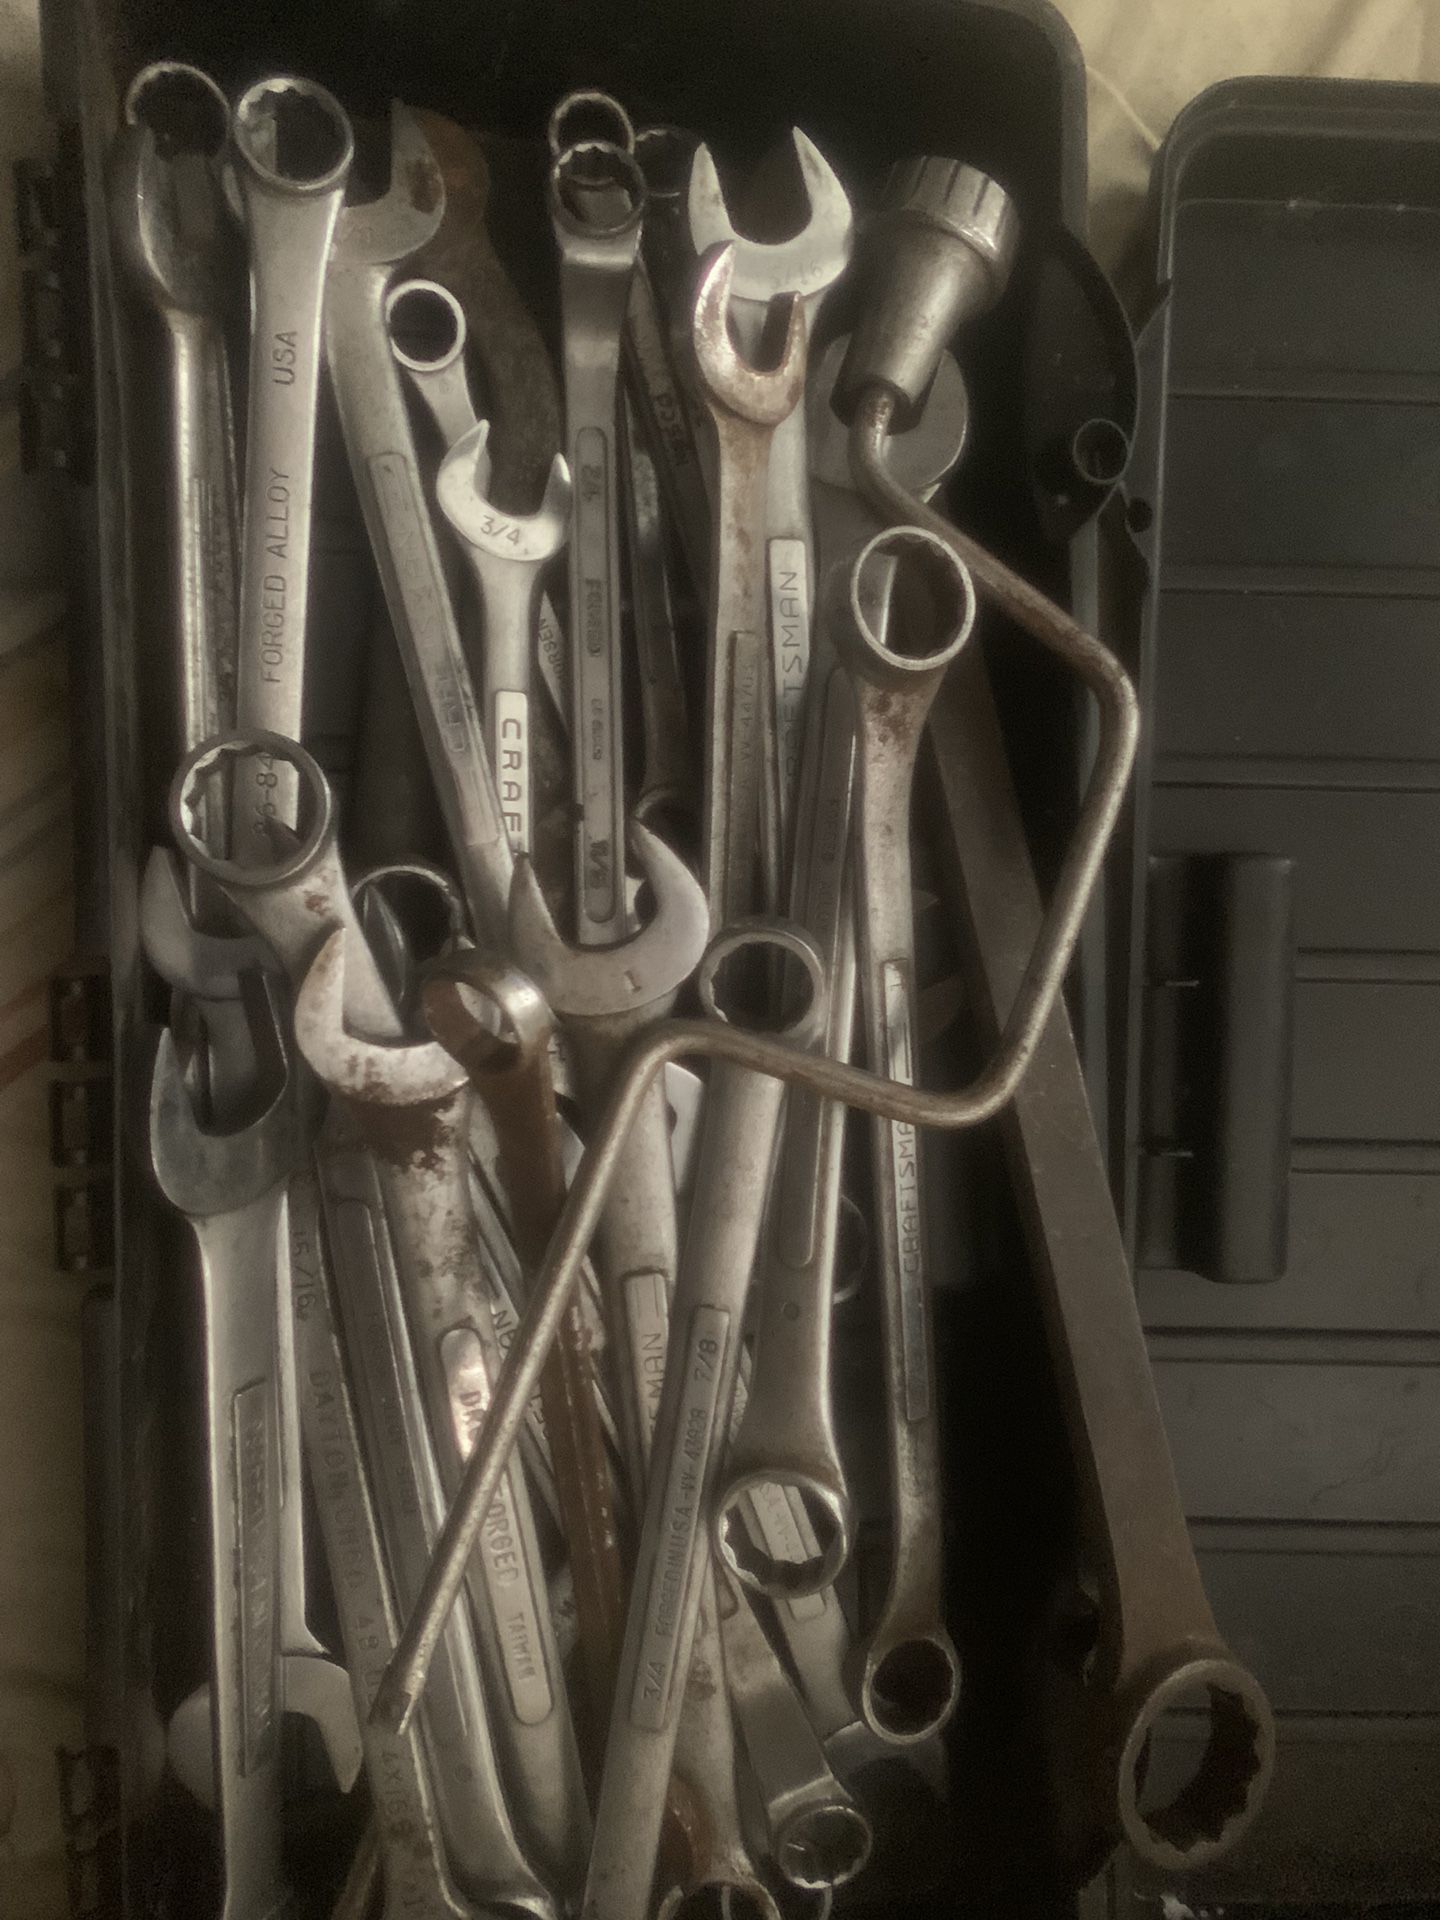 29 large wrenches most are Craftsman.